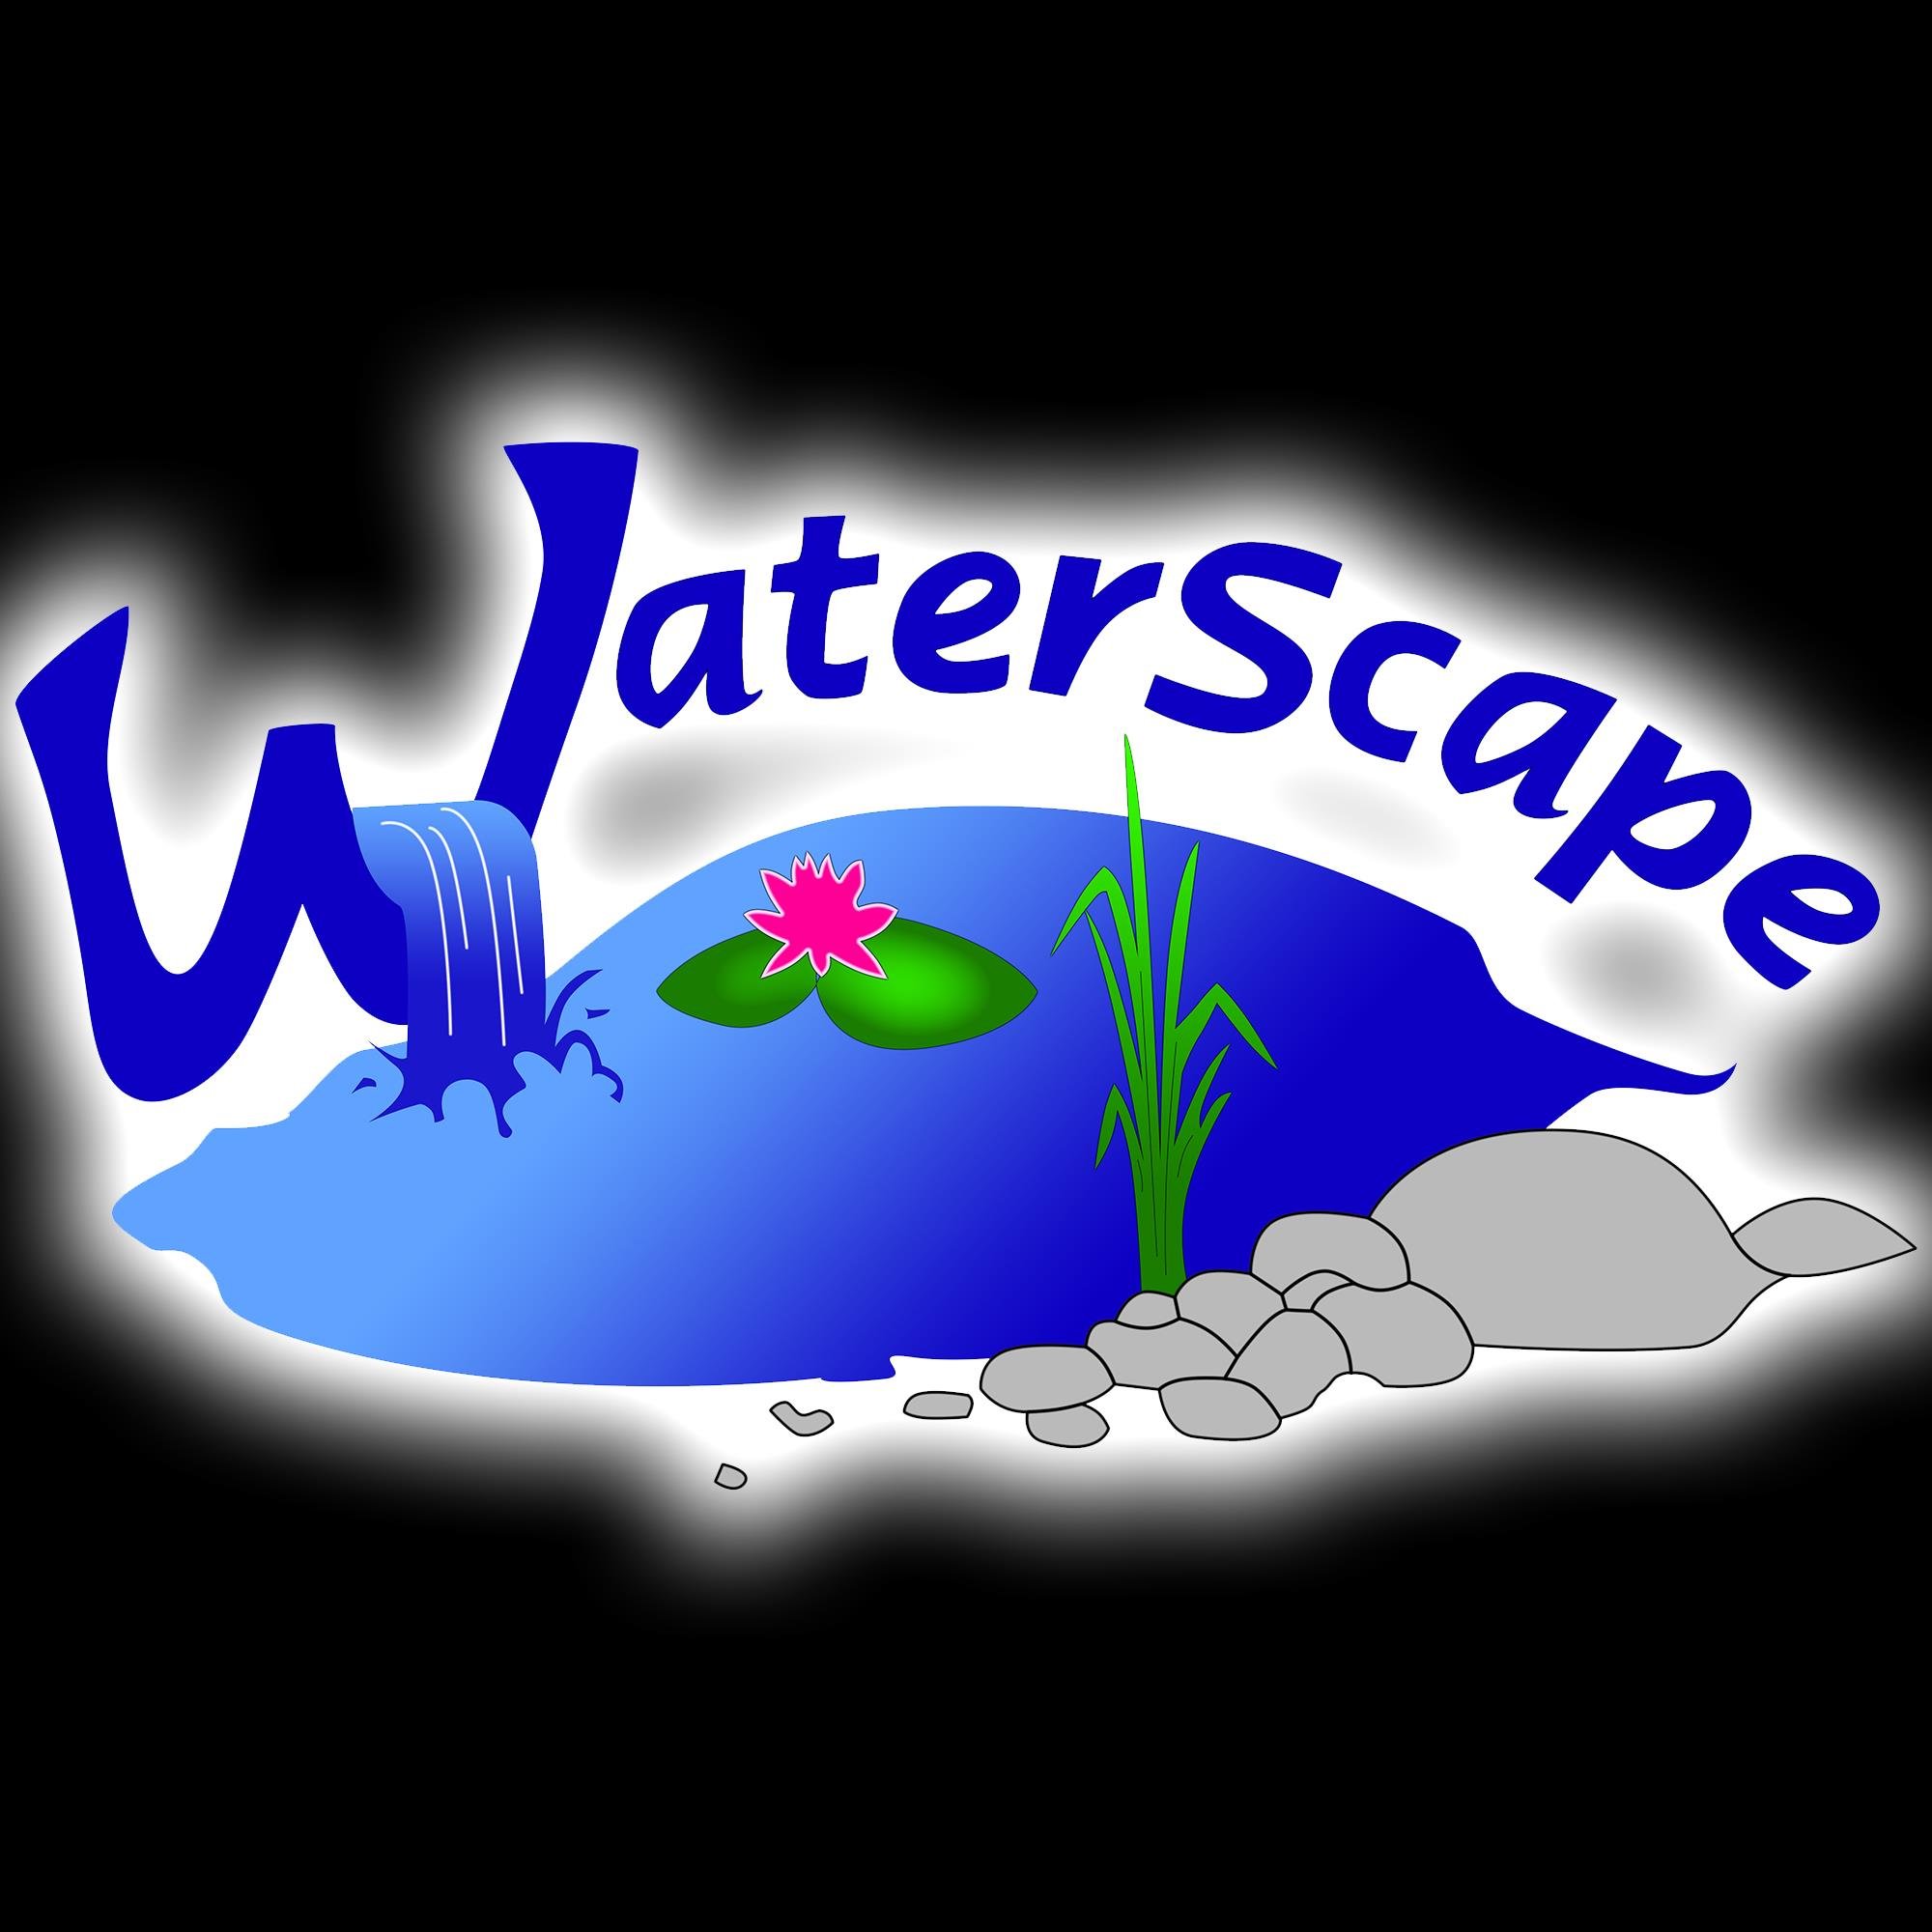 WaterScape is a multi-award winning SE Michigan landscape company specializing in the design, construction and maintenance of custom water features.